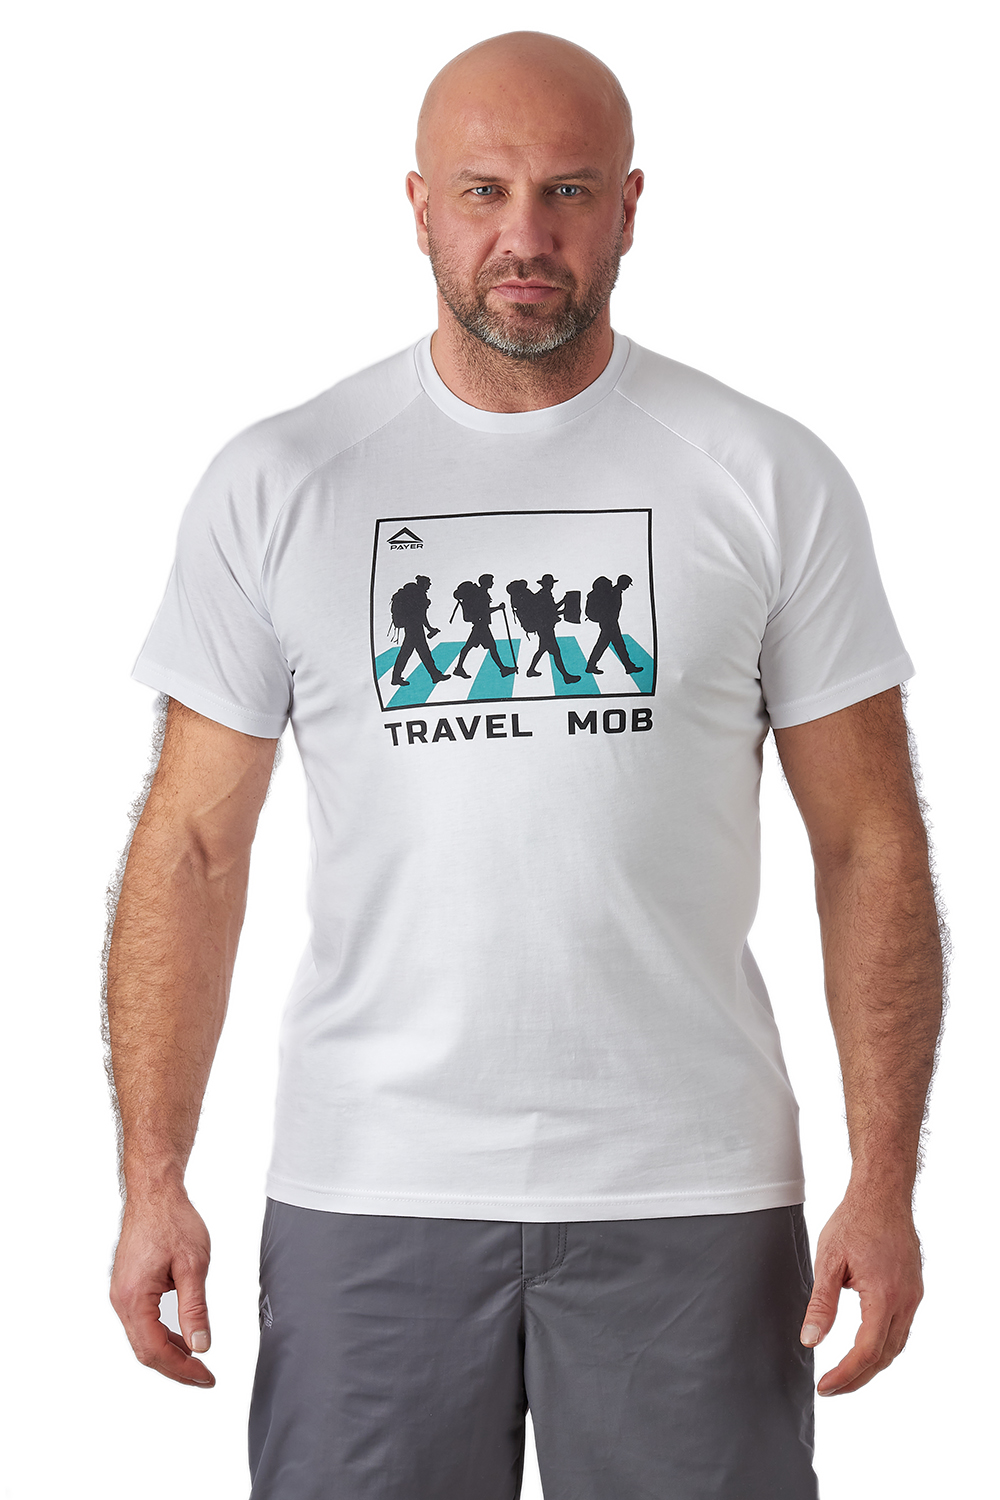  PAYER Travel Mob ( ) (, ) PTS-01W (- M)